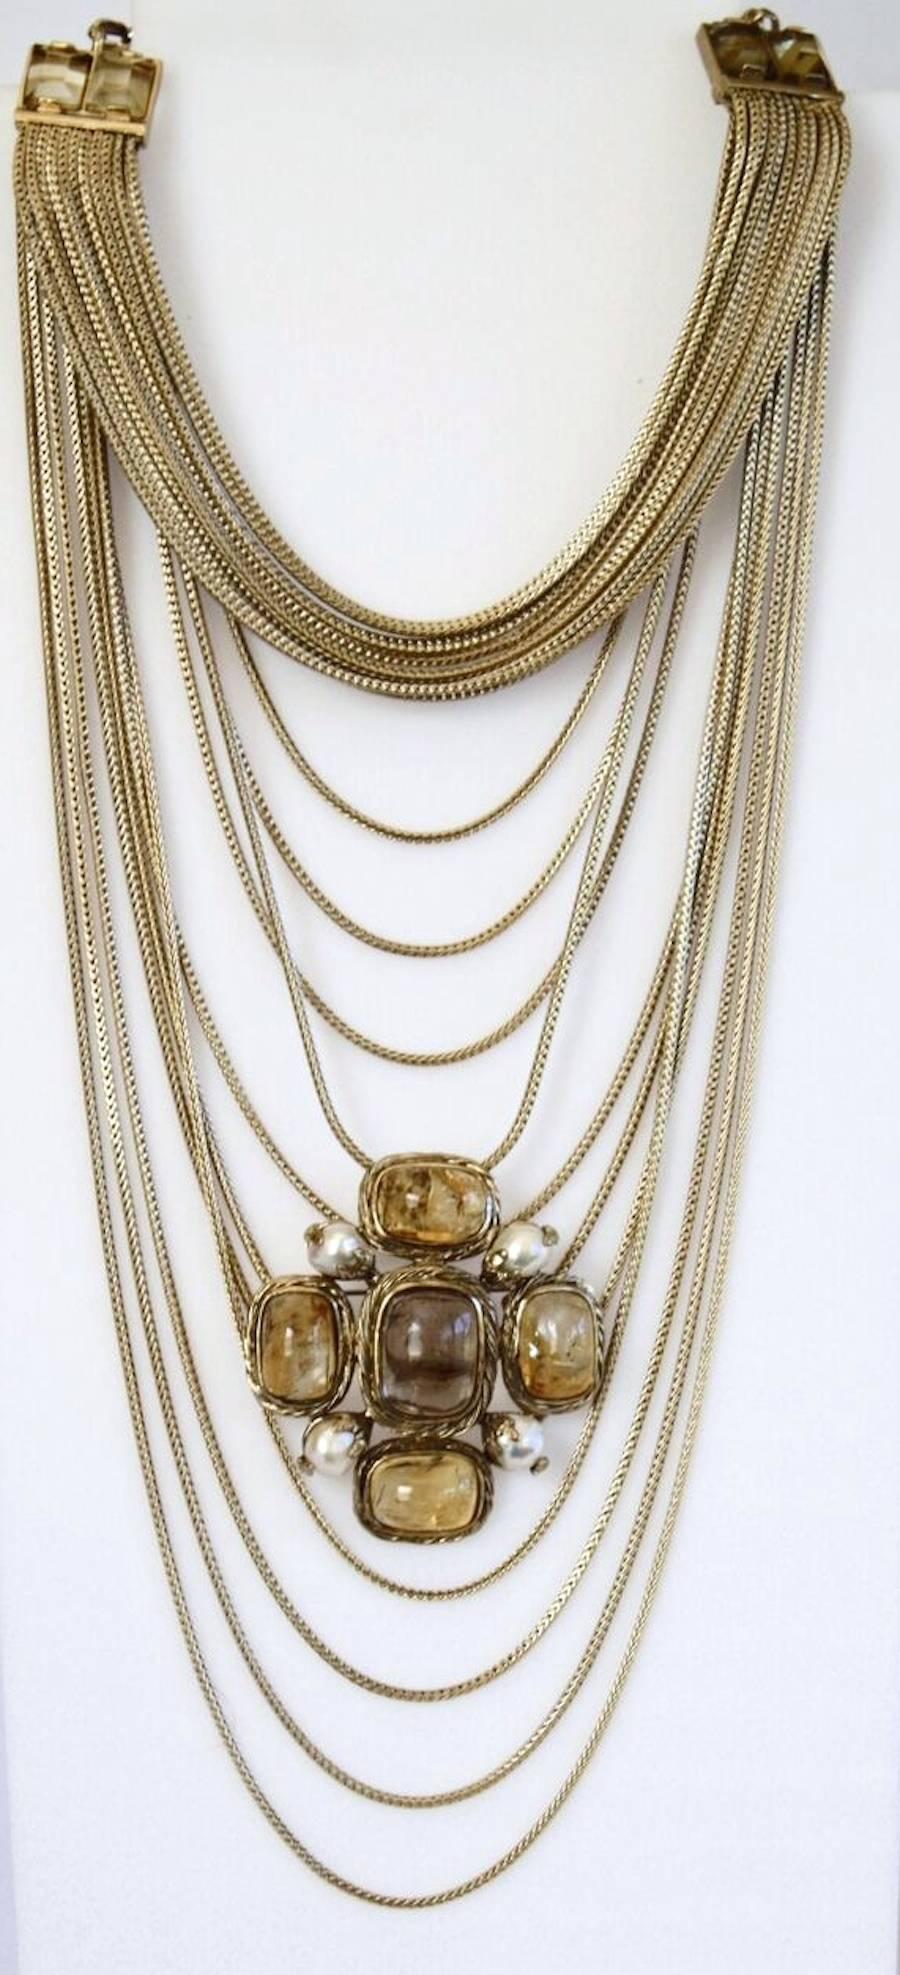 Goossens Paris pale gold multi chain necklace with rock crystal detailing. The chains are a gorgeous shade of gold and are made to hold decorative pins (sold separately). 

First layer of necklace is 13